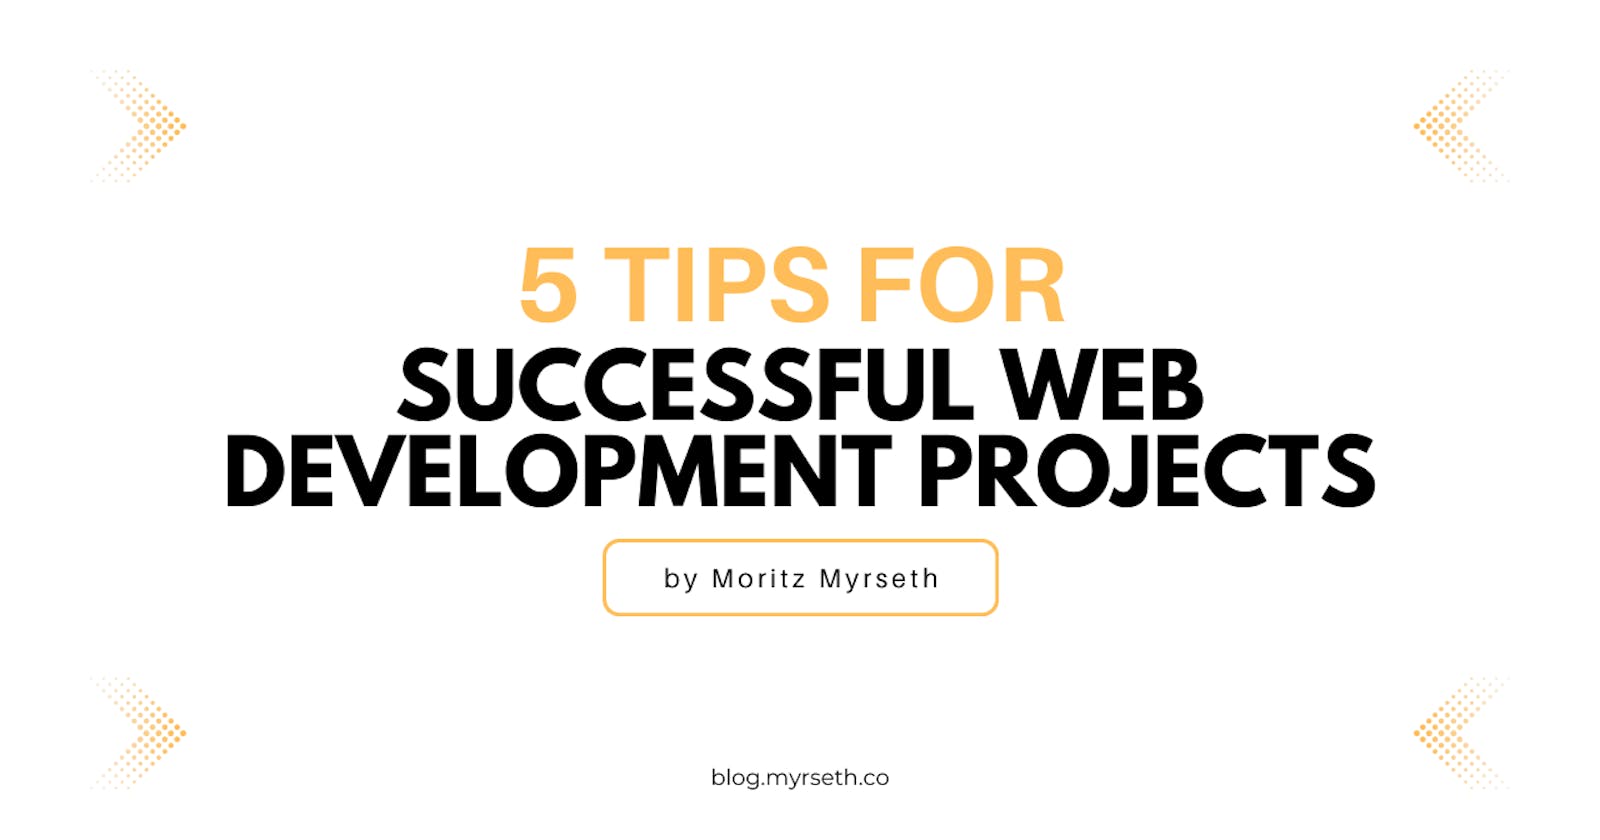 5 Tips for Successful Web Development Projects